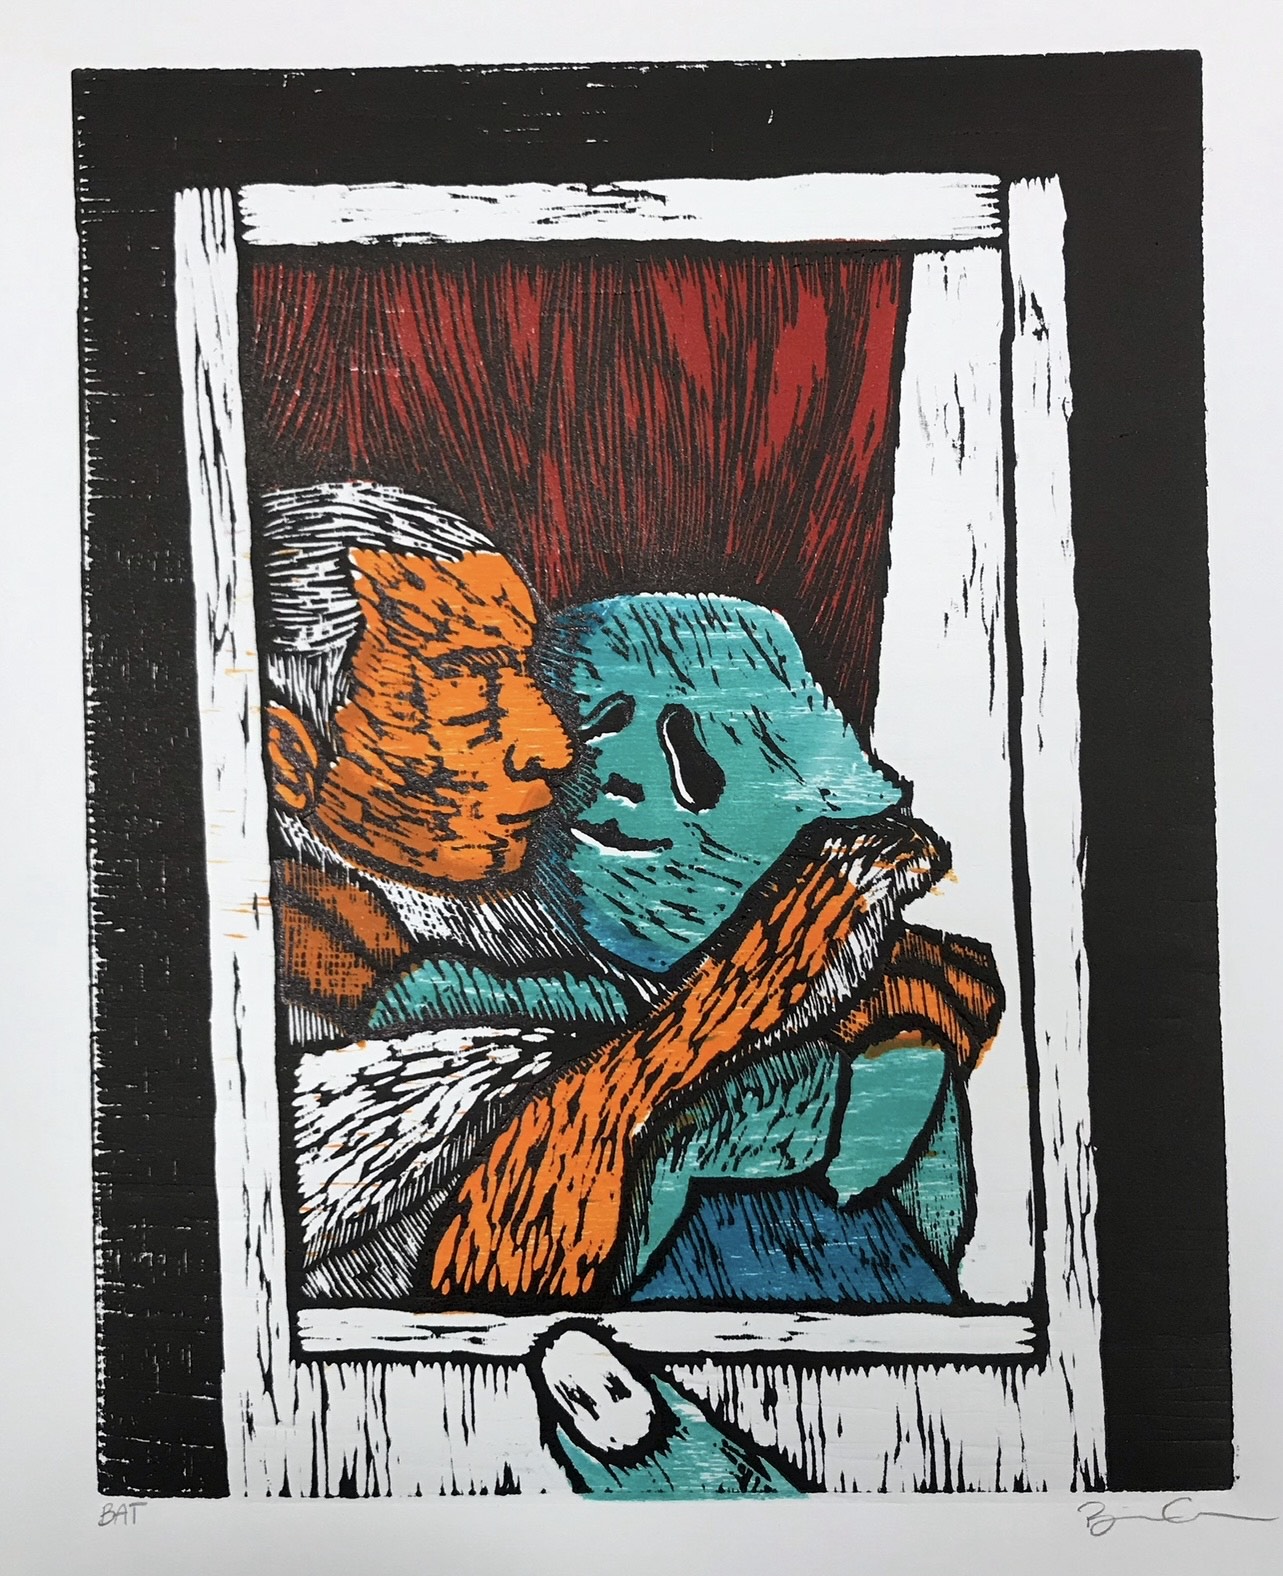 A polariod of a man and a ghost in an embrace, a thumb covers portion of the polariod at the bottom of the image